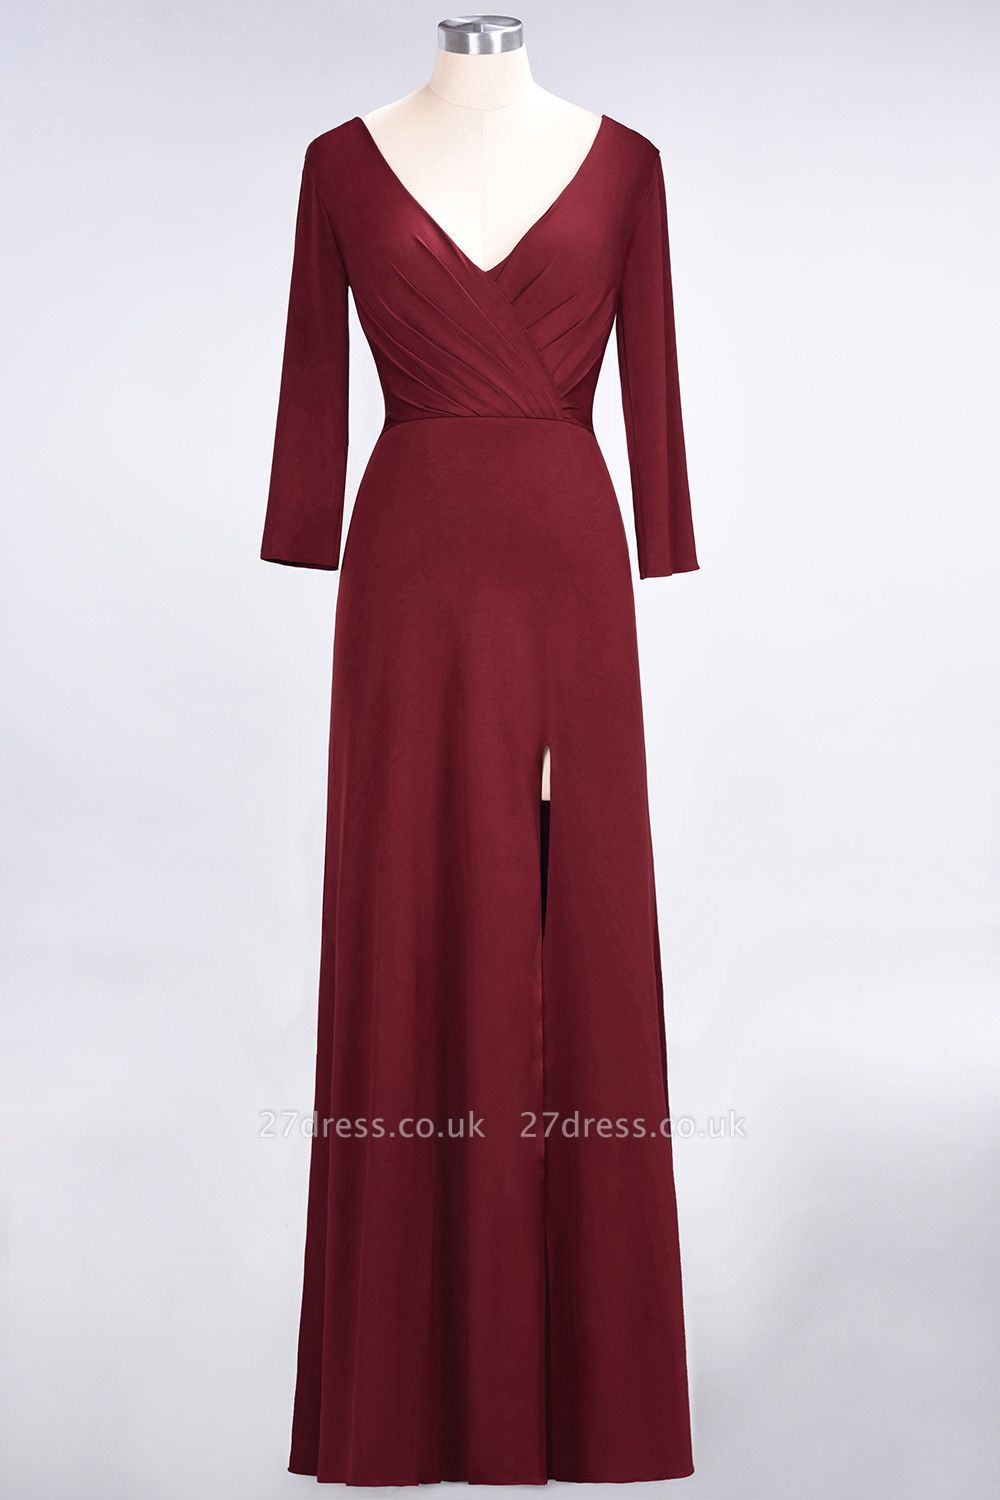 Sexy A-line Spandex Alluring V-neck Long-Sleeves Side-Slit Floor-Length Bridesmaid Dress UK UK with Ruffles